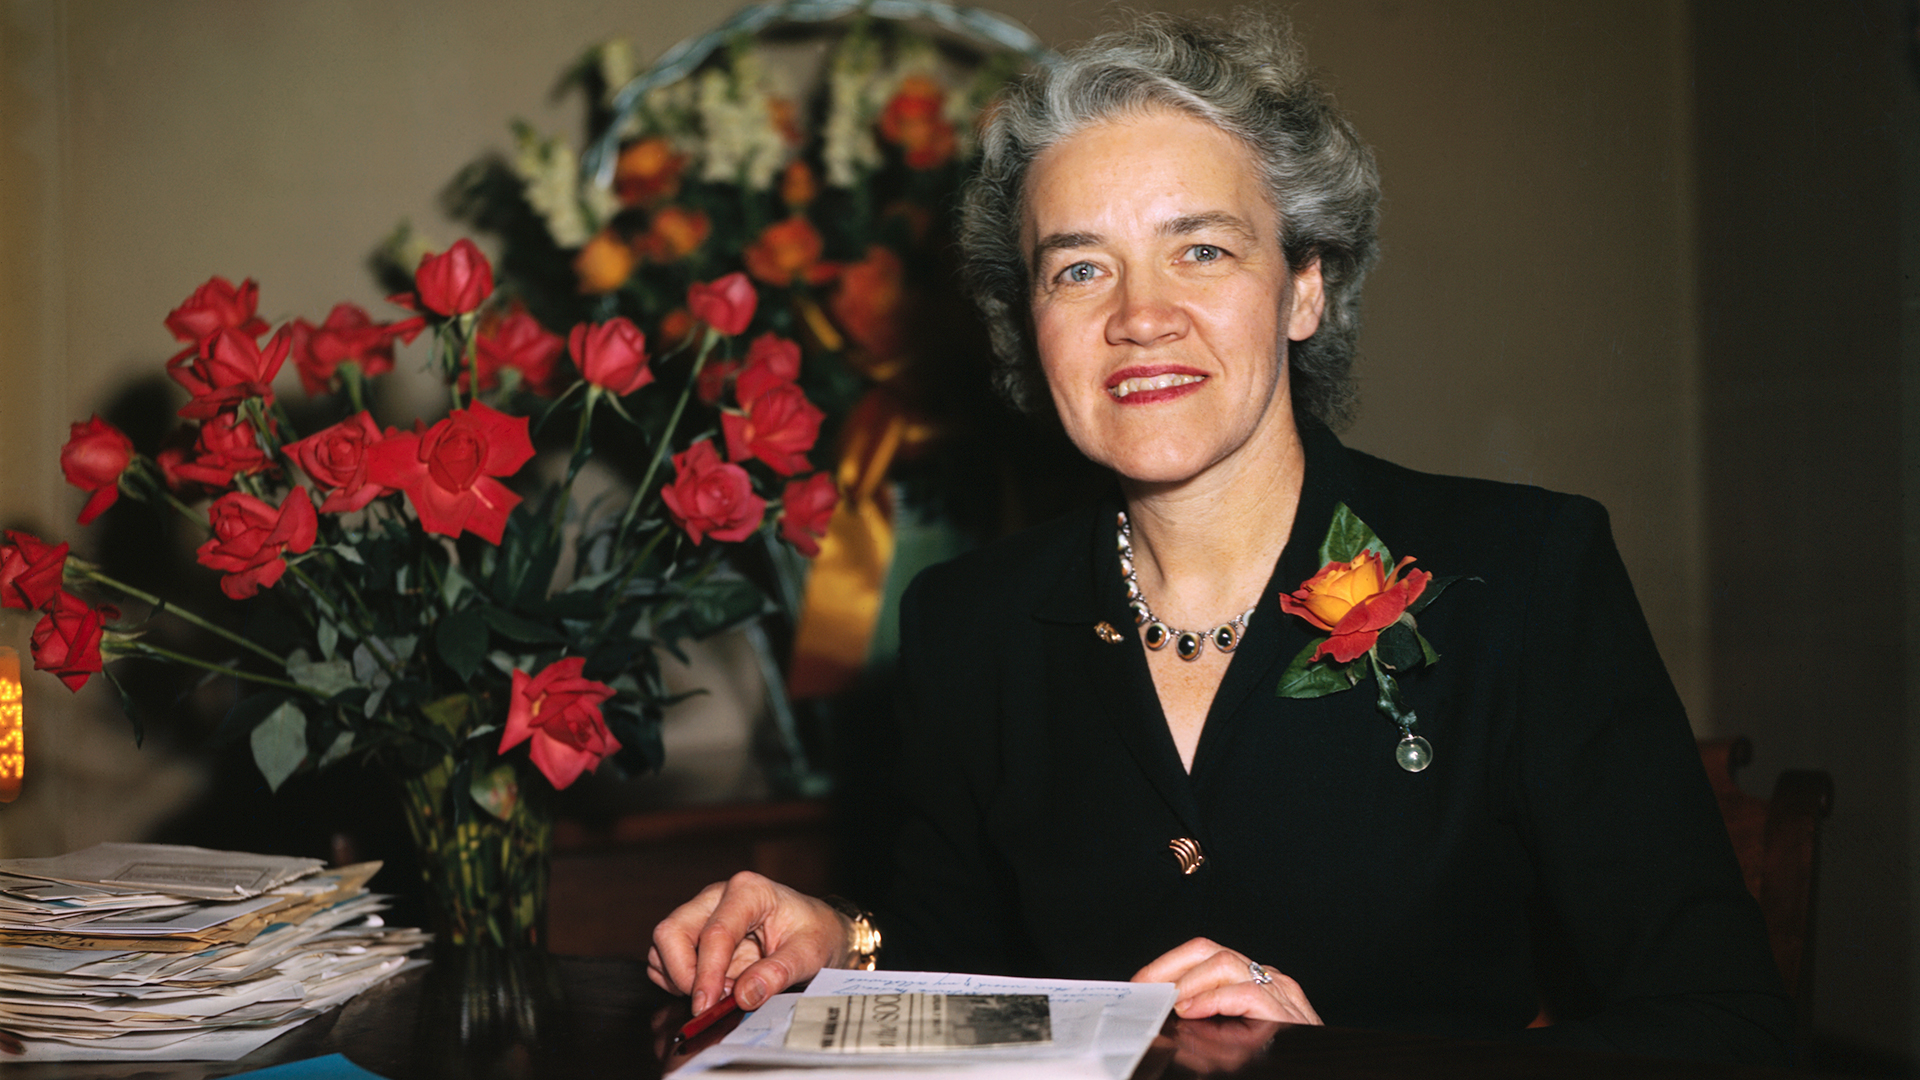 September 13, 1948: Margaret Chase Smith Became the First Woman to Serve in the U.S. House and Senate